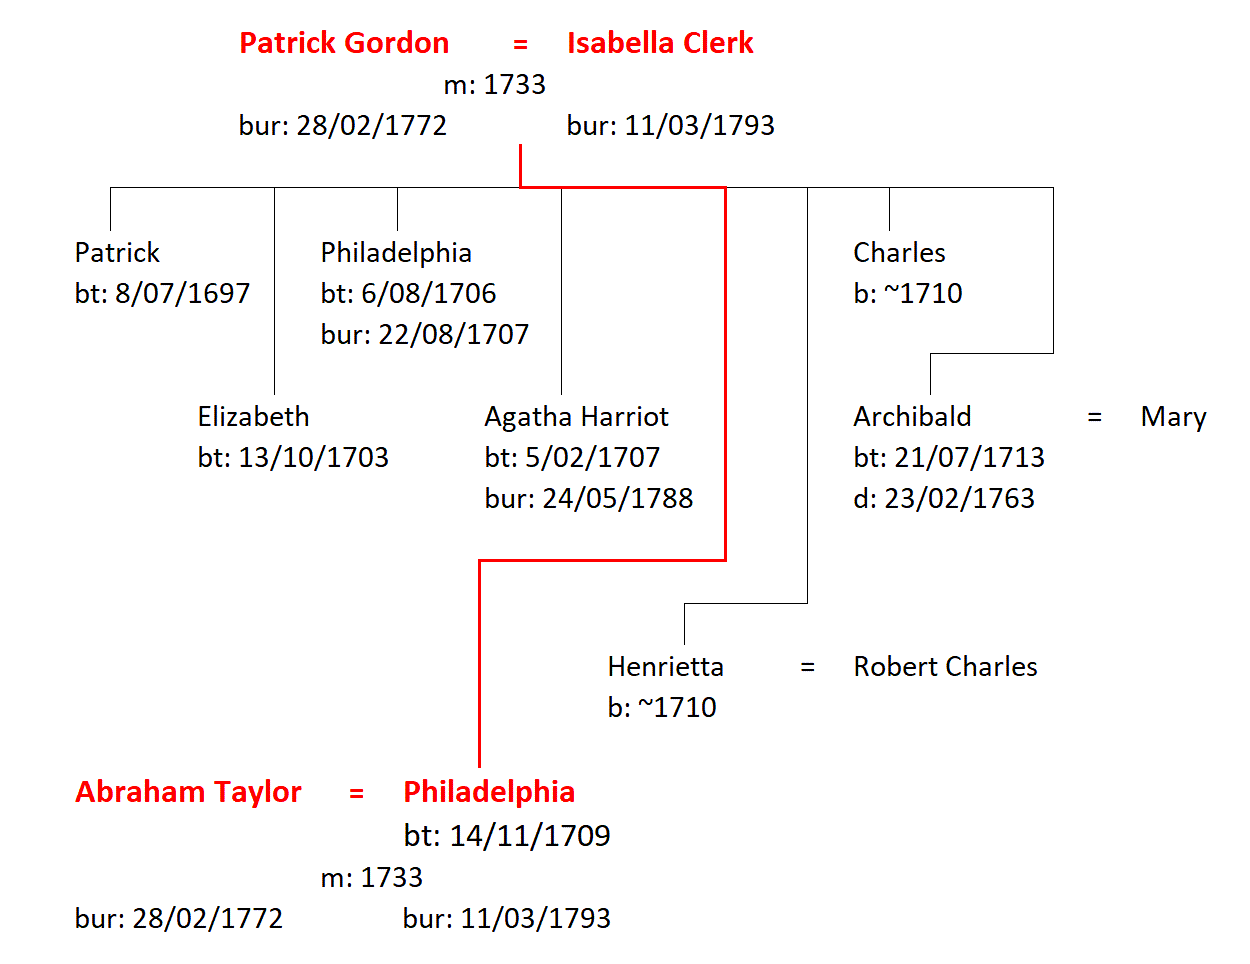 Figure 4: The Family of Patrick and Isabella Gordon